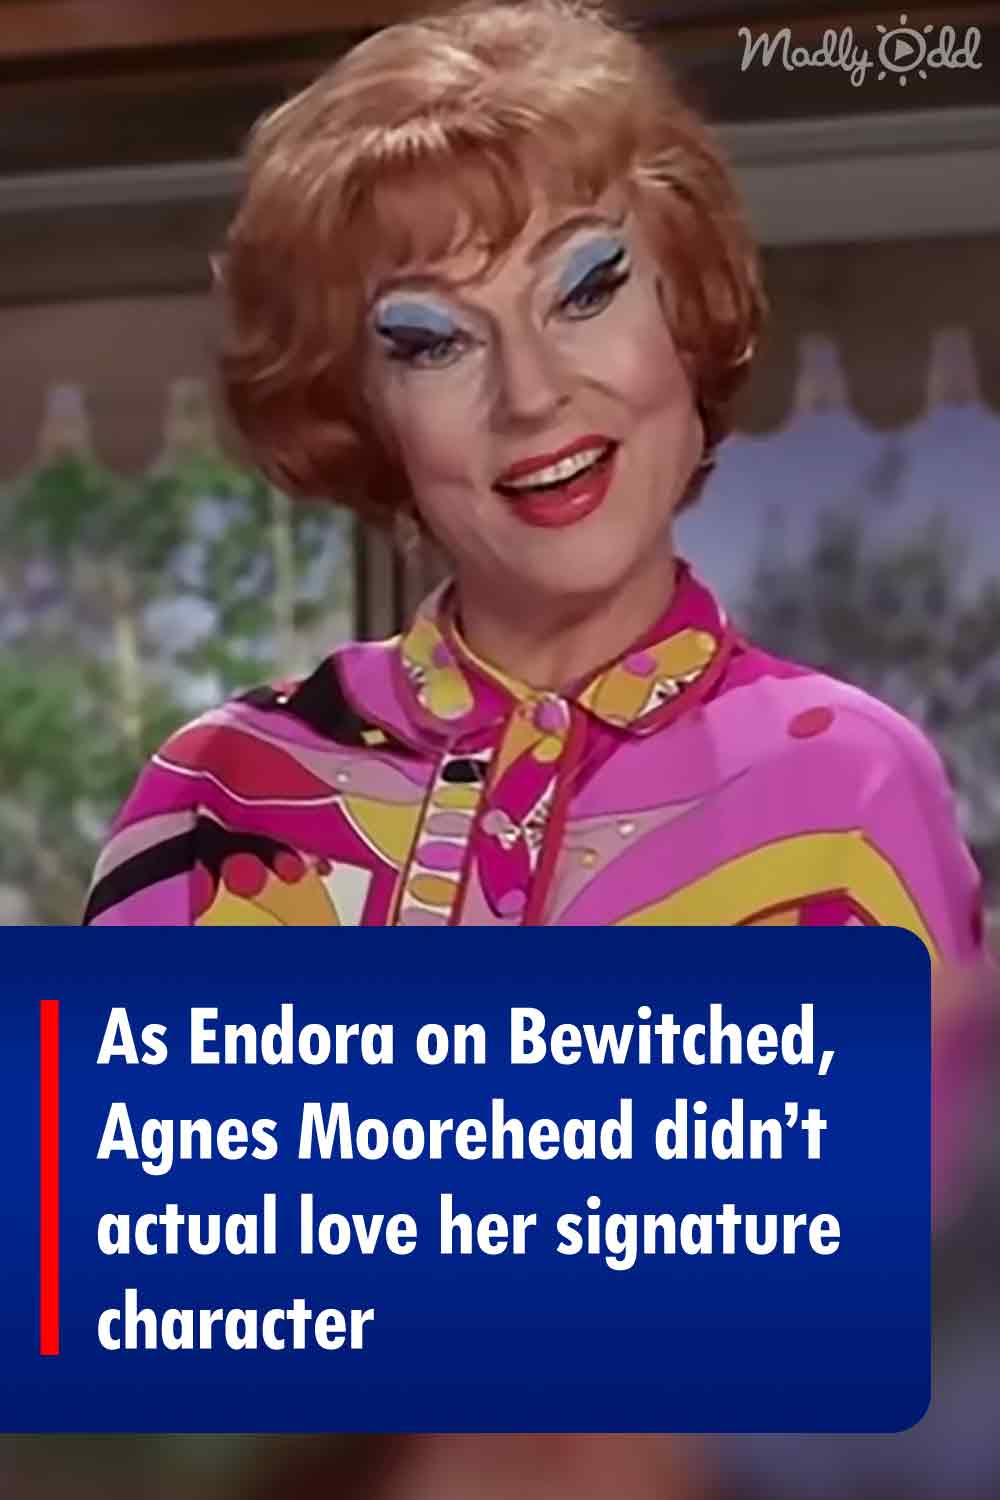 As Endora on Bewitched, Agnes Moorehead didn’t actual love her signature character